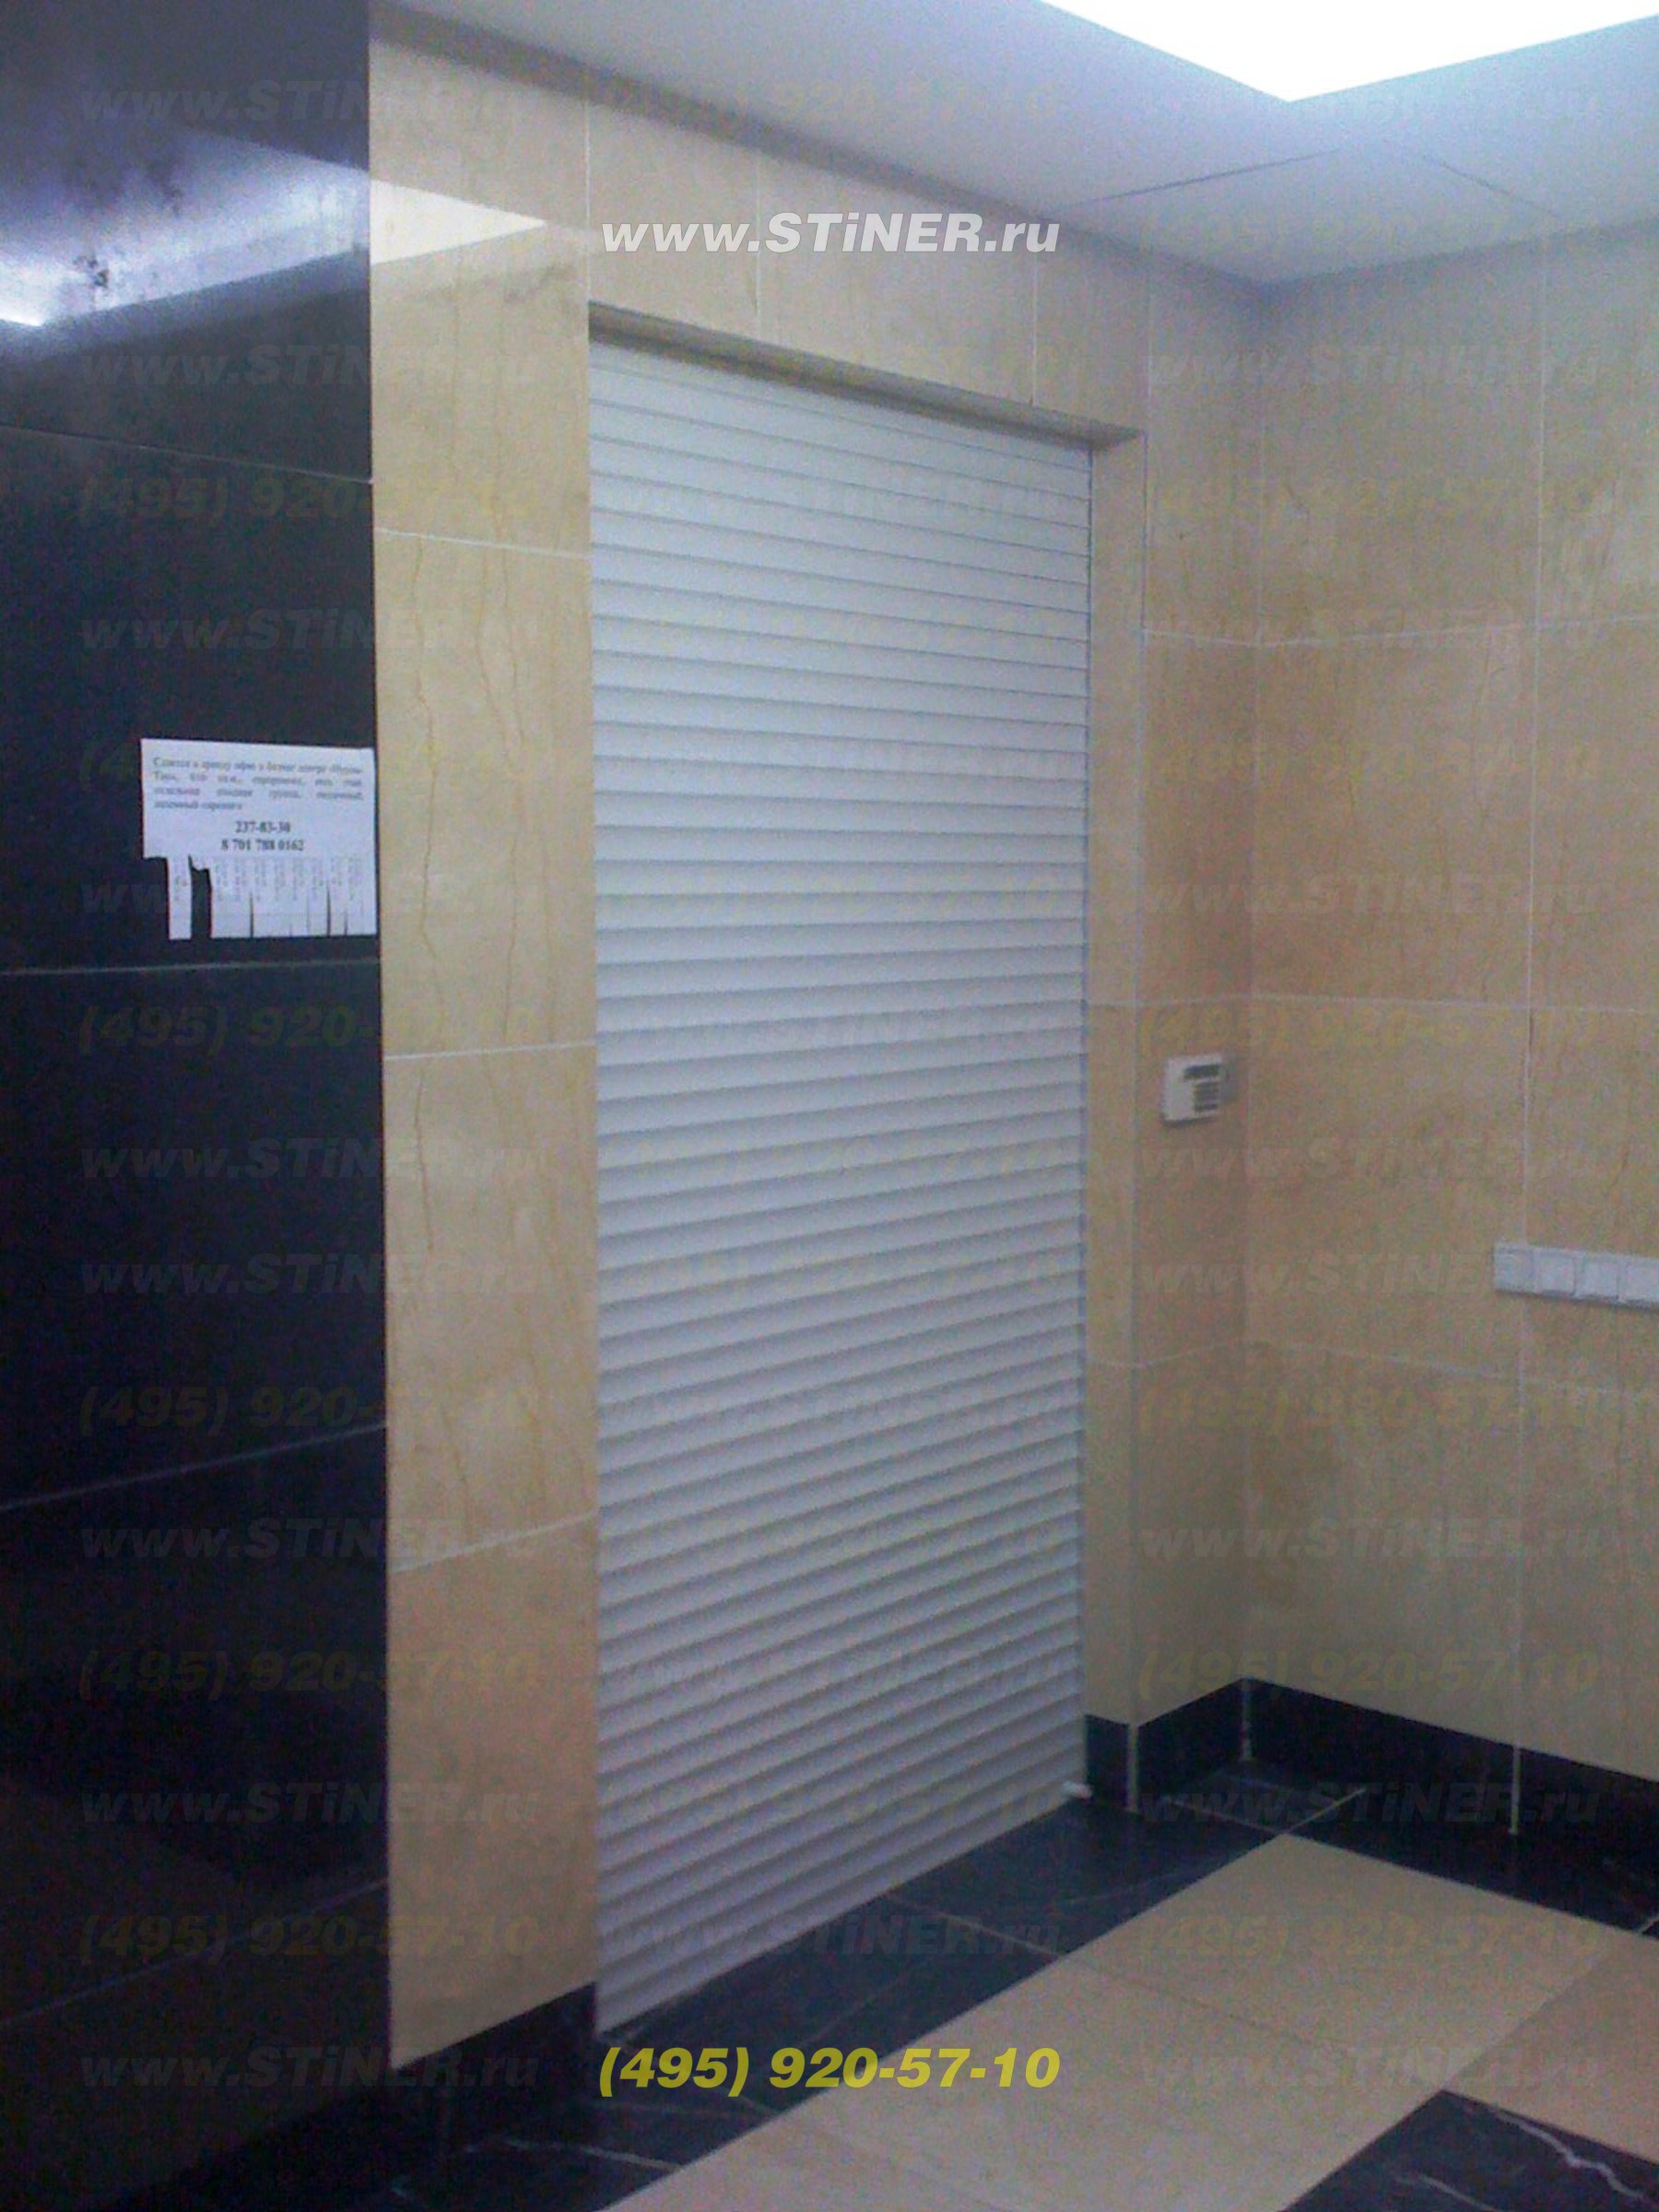 White shutters built into wall in the office building. Electric rolling shutters with remote control